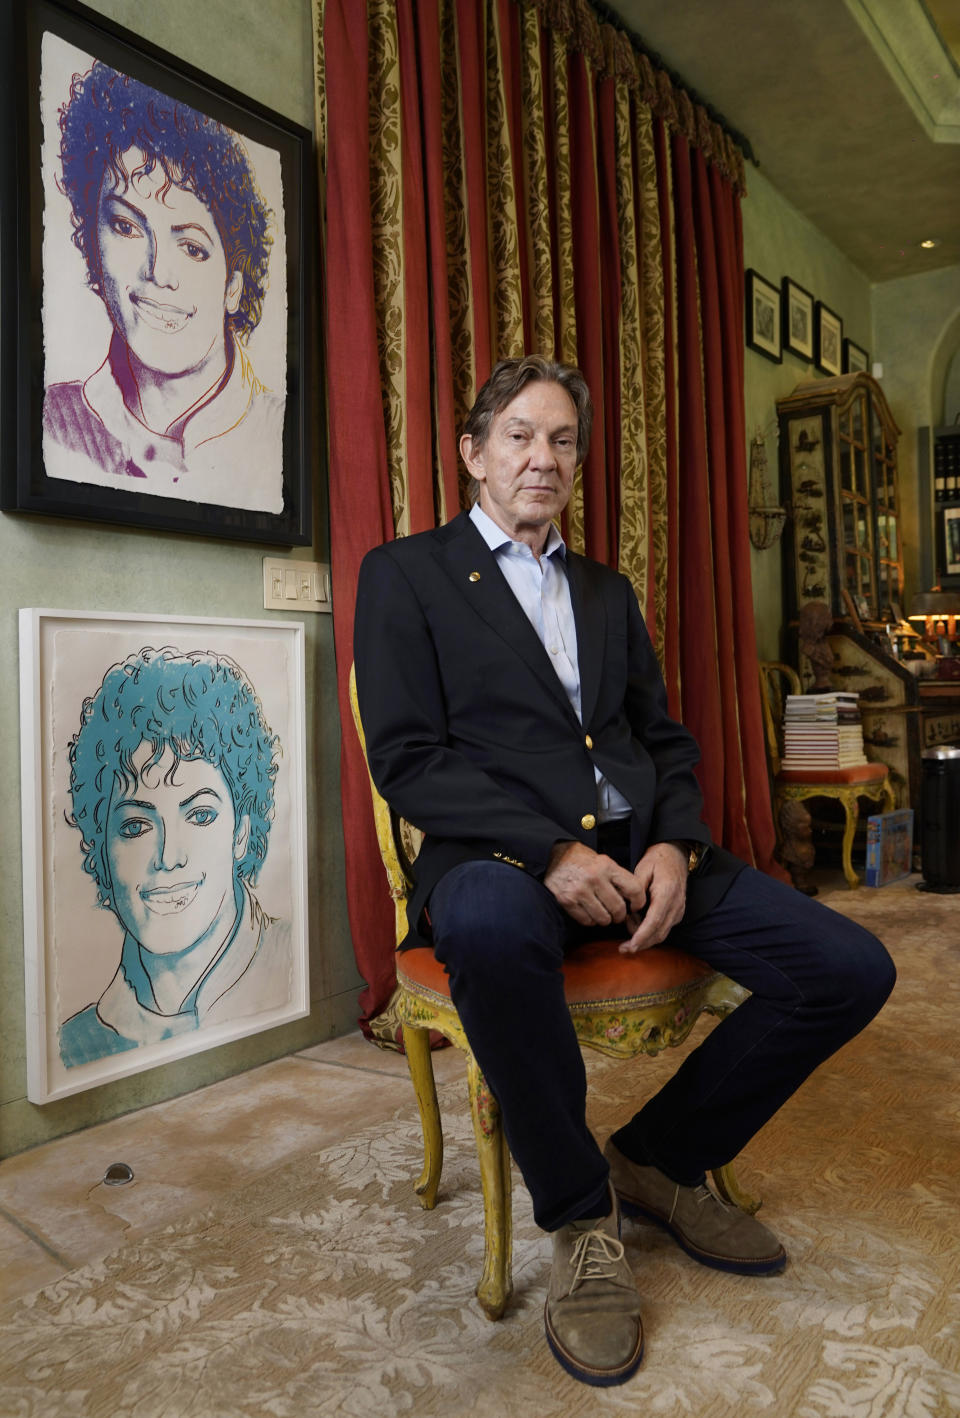 Entertainment attorney and Michael Jackson Estate co-executor John Branca poses alongside Andy Warhol prints of Jackson, Thursday, July 8, 2021, at his home in Los Angeles. (AP Photo/Chris Pizzello)